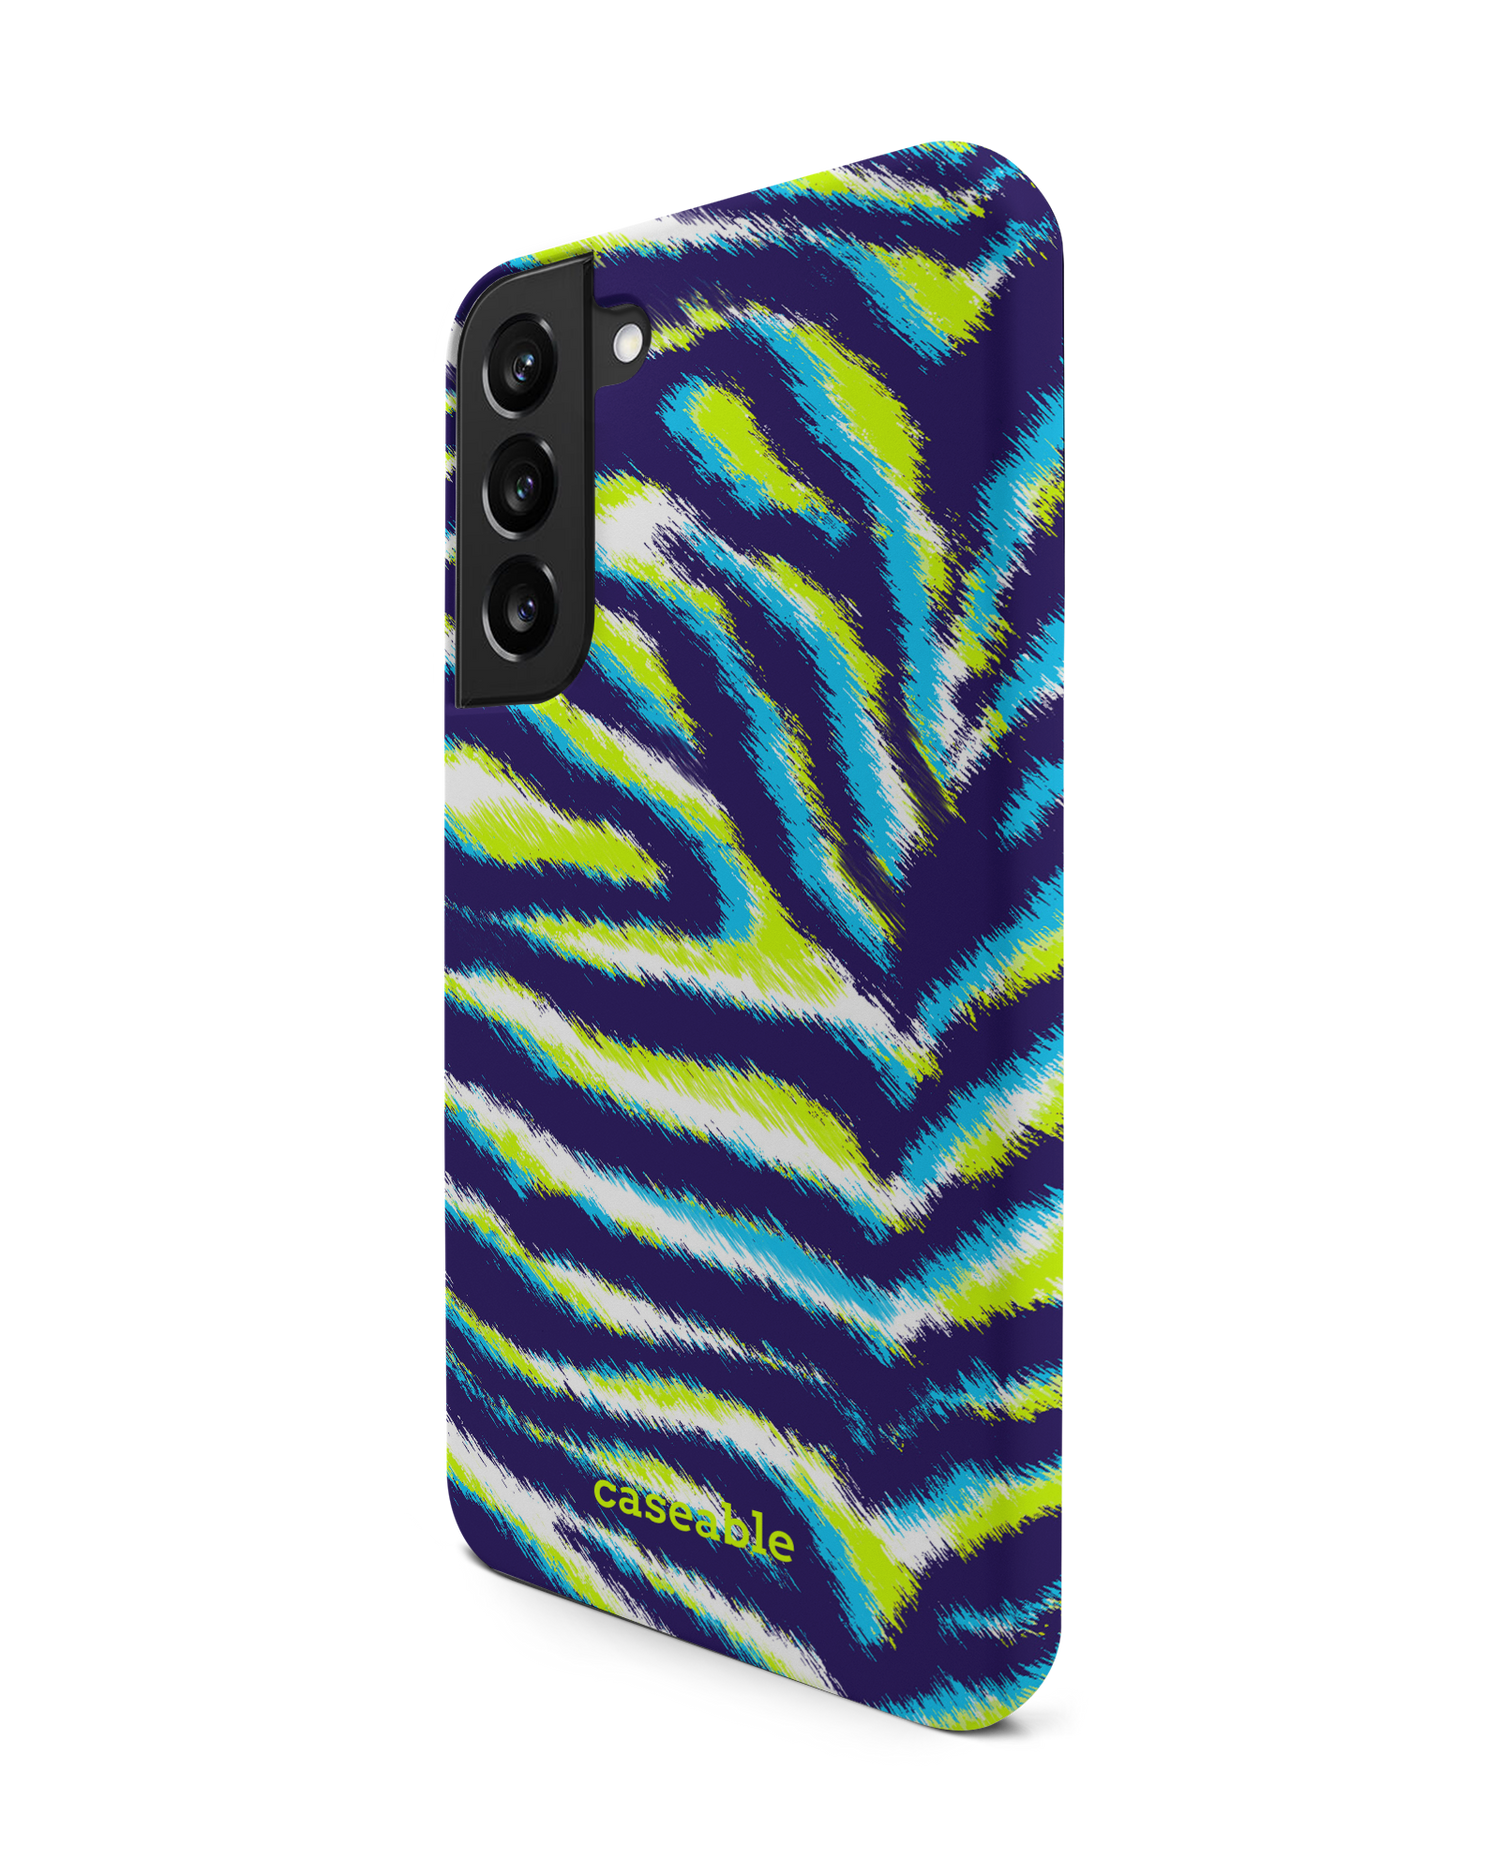 Neon Zebra Premium Phone Case Samsung Galaxy S22 Plus 5G: View from the right side